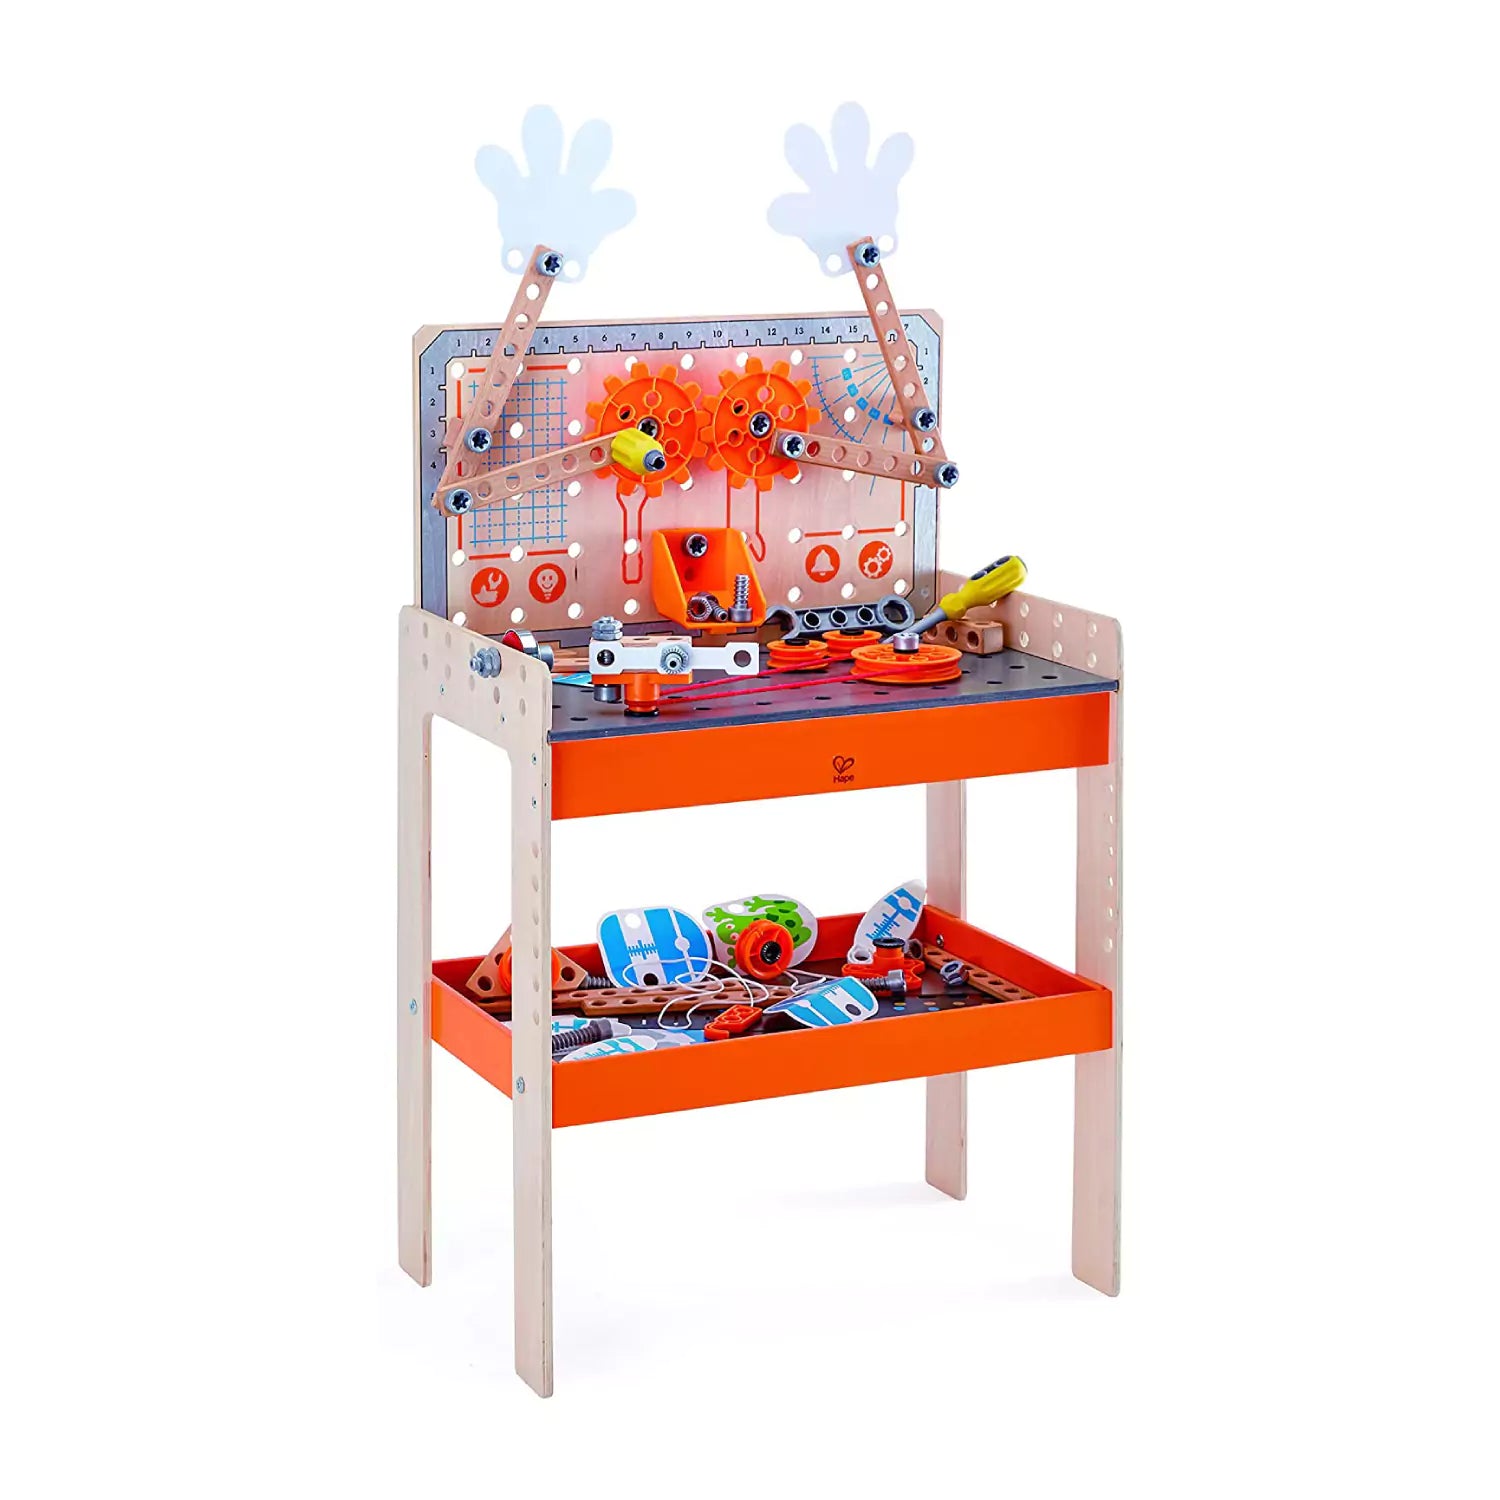 An image of Pretend Play Scientific Workbench - Fun and Educational Toy